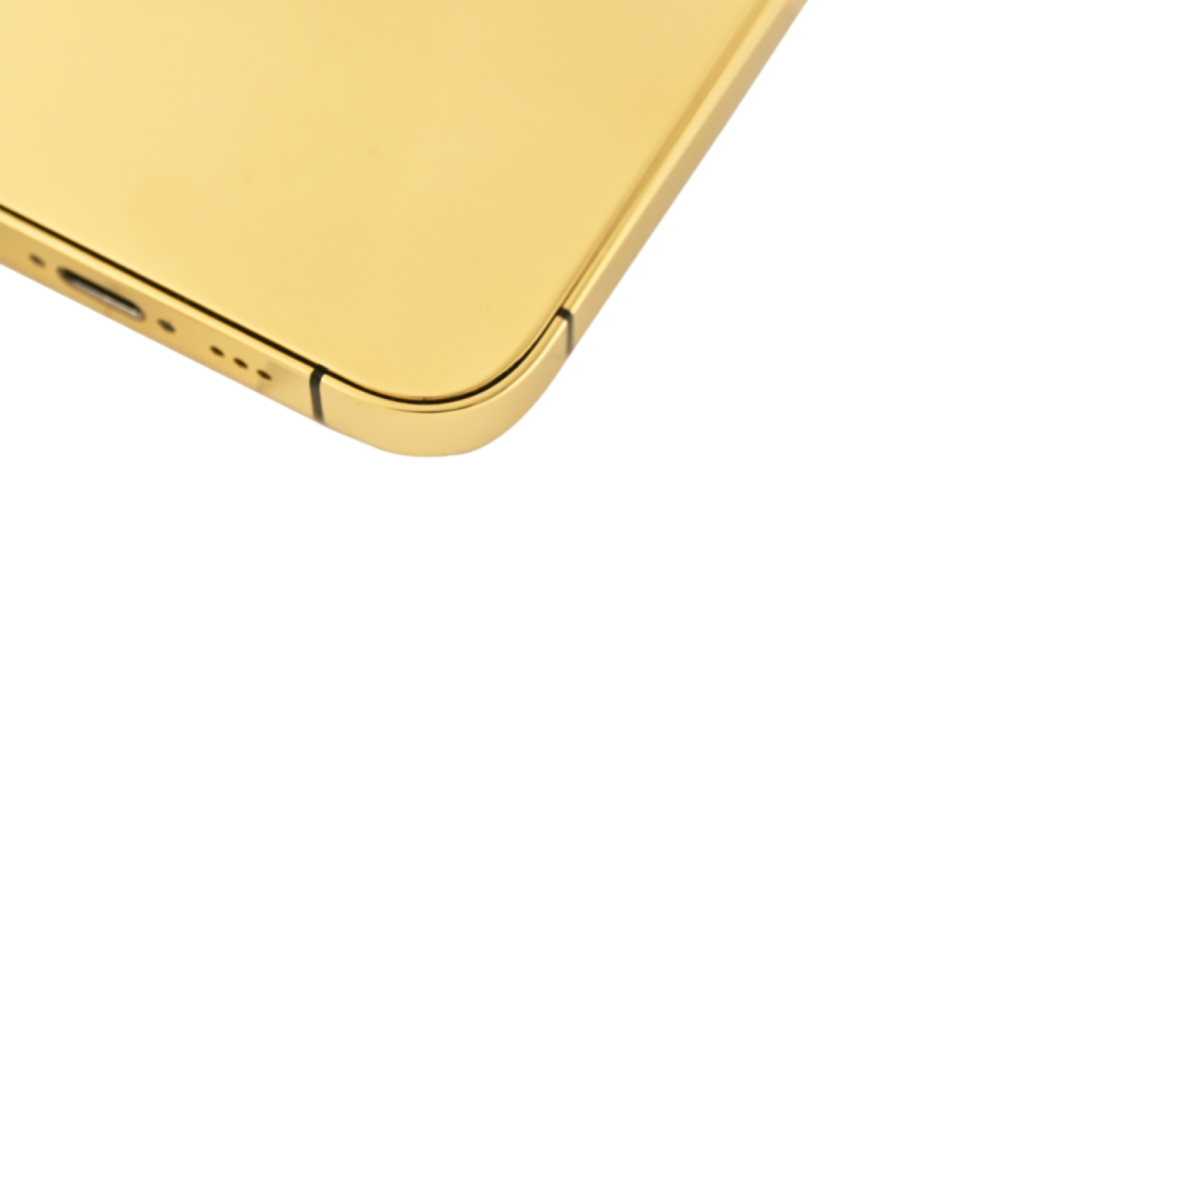 Caviar Luxury 24k Full Gold Customized iPhone 14 Pro 128 GB Limited Edition